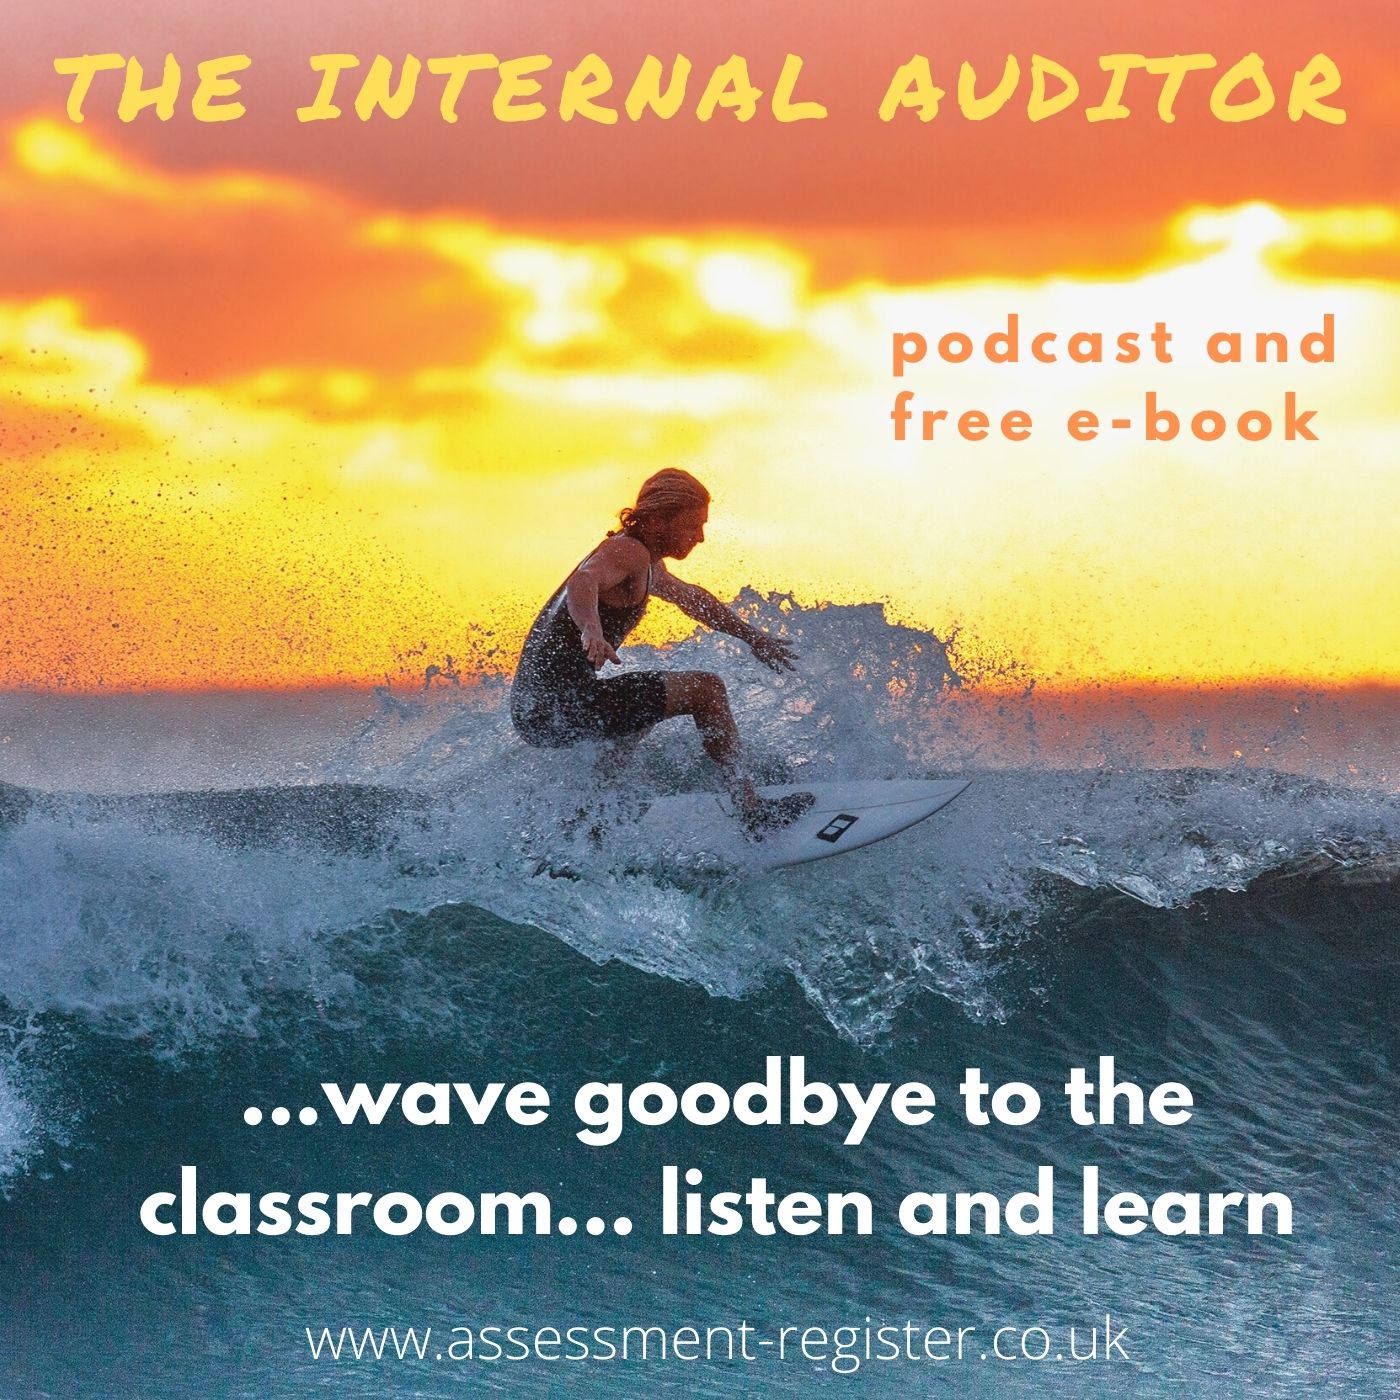 The Internal Auditor - New Podcast Cover 2